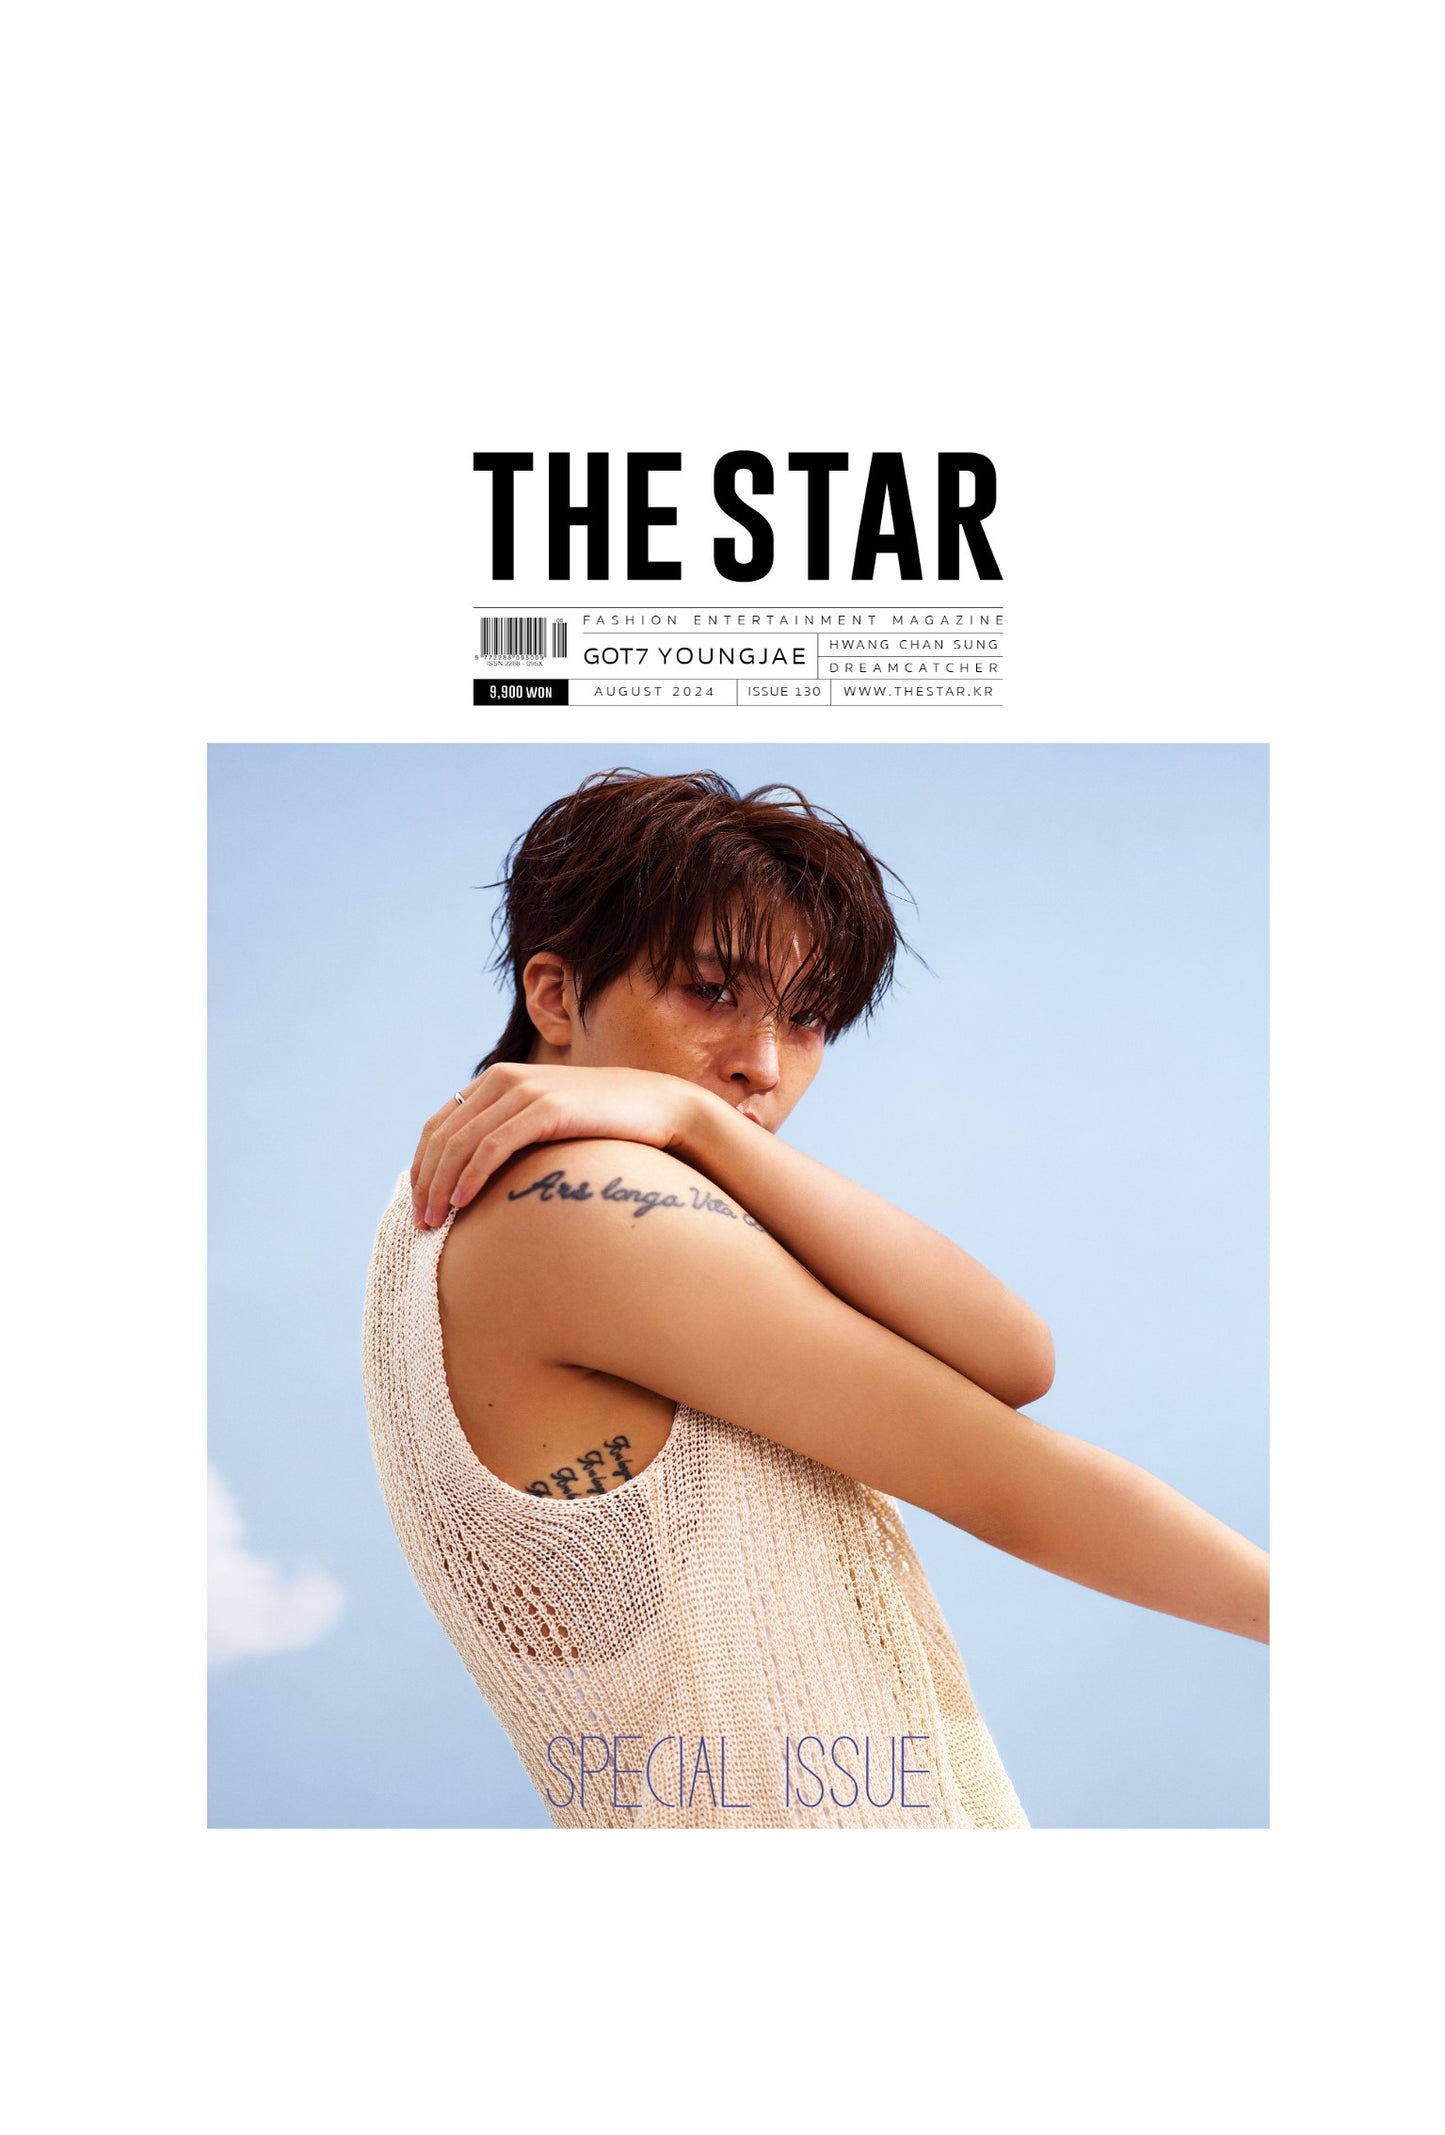 THE STAR | 2024 AUG. | GOT7 YOUNGJAE COVER